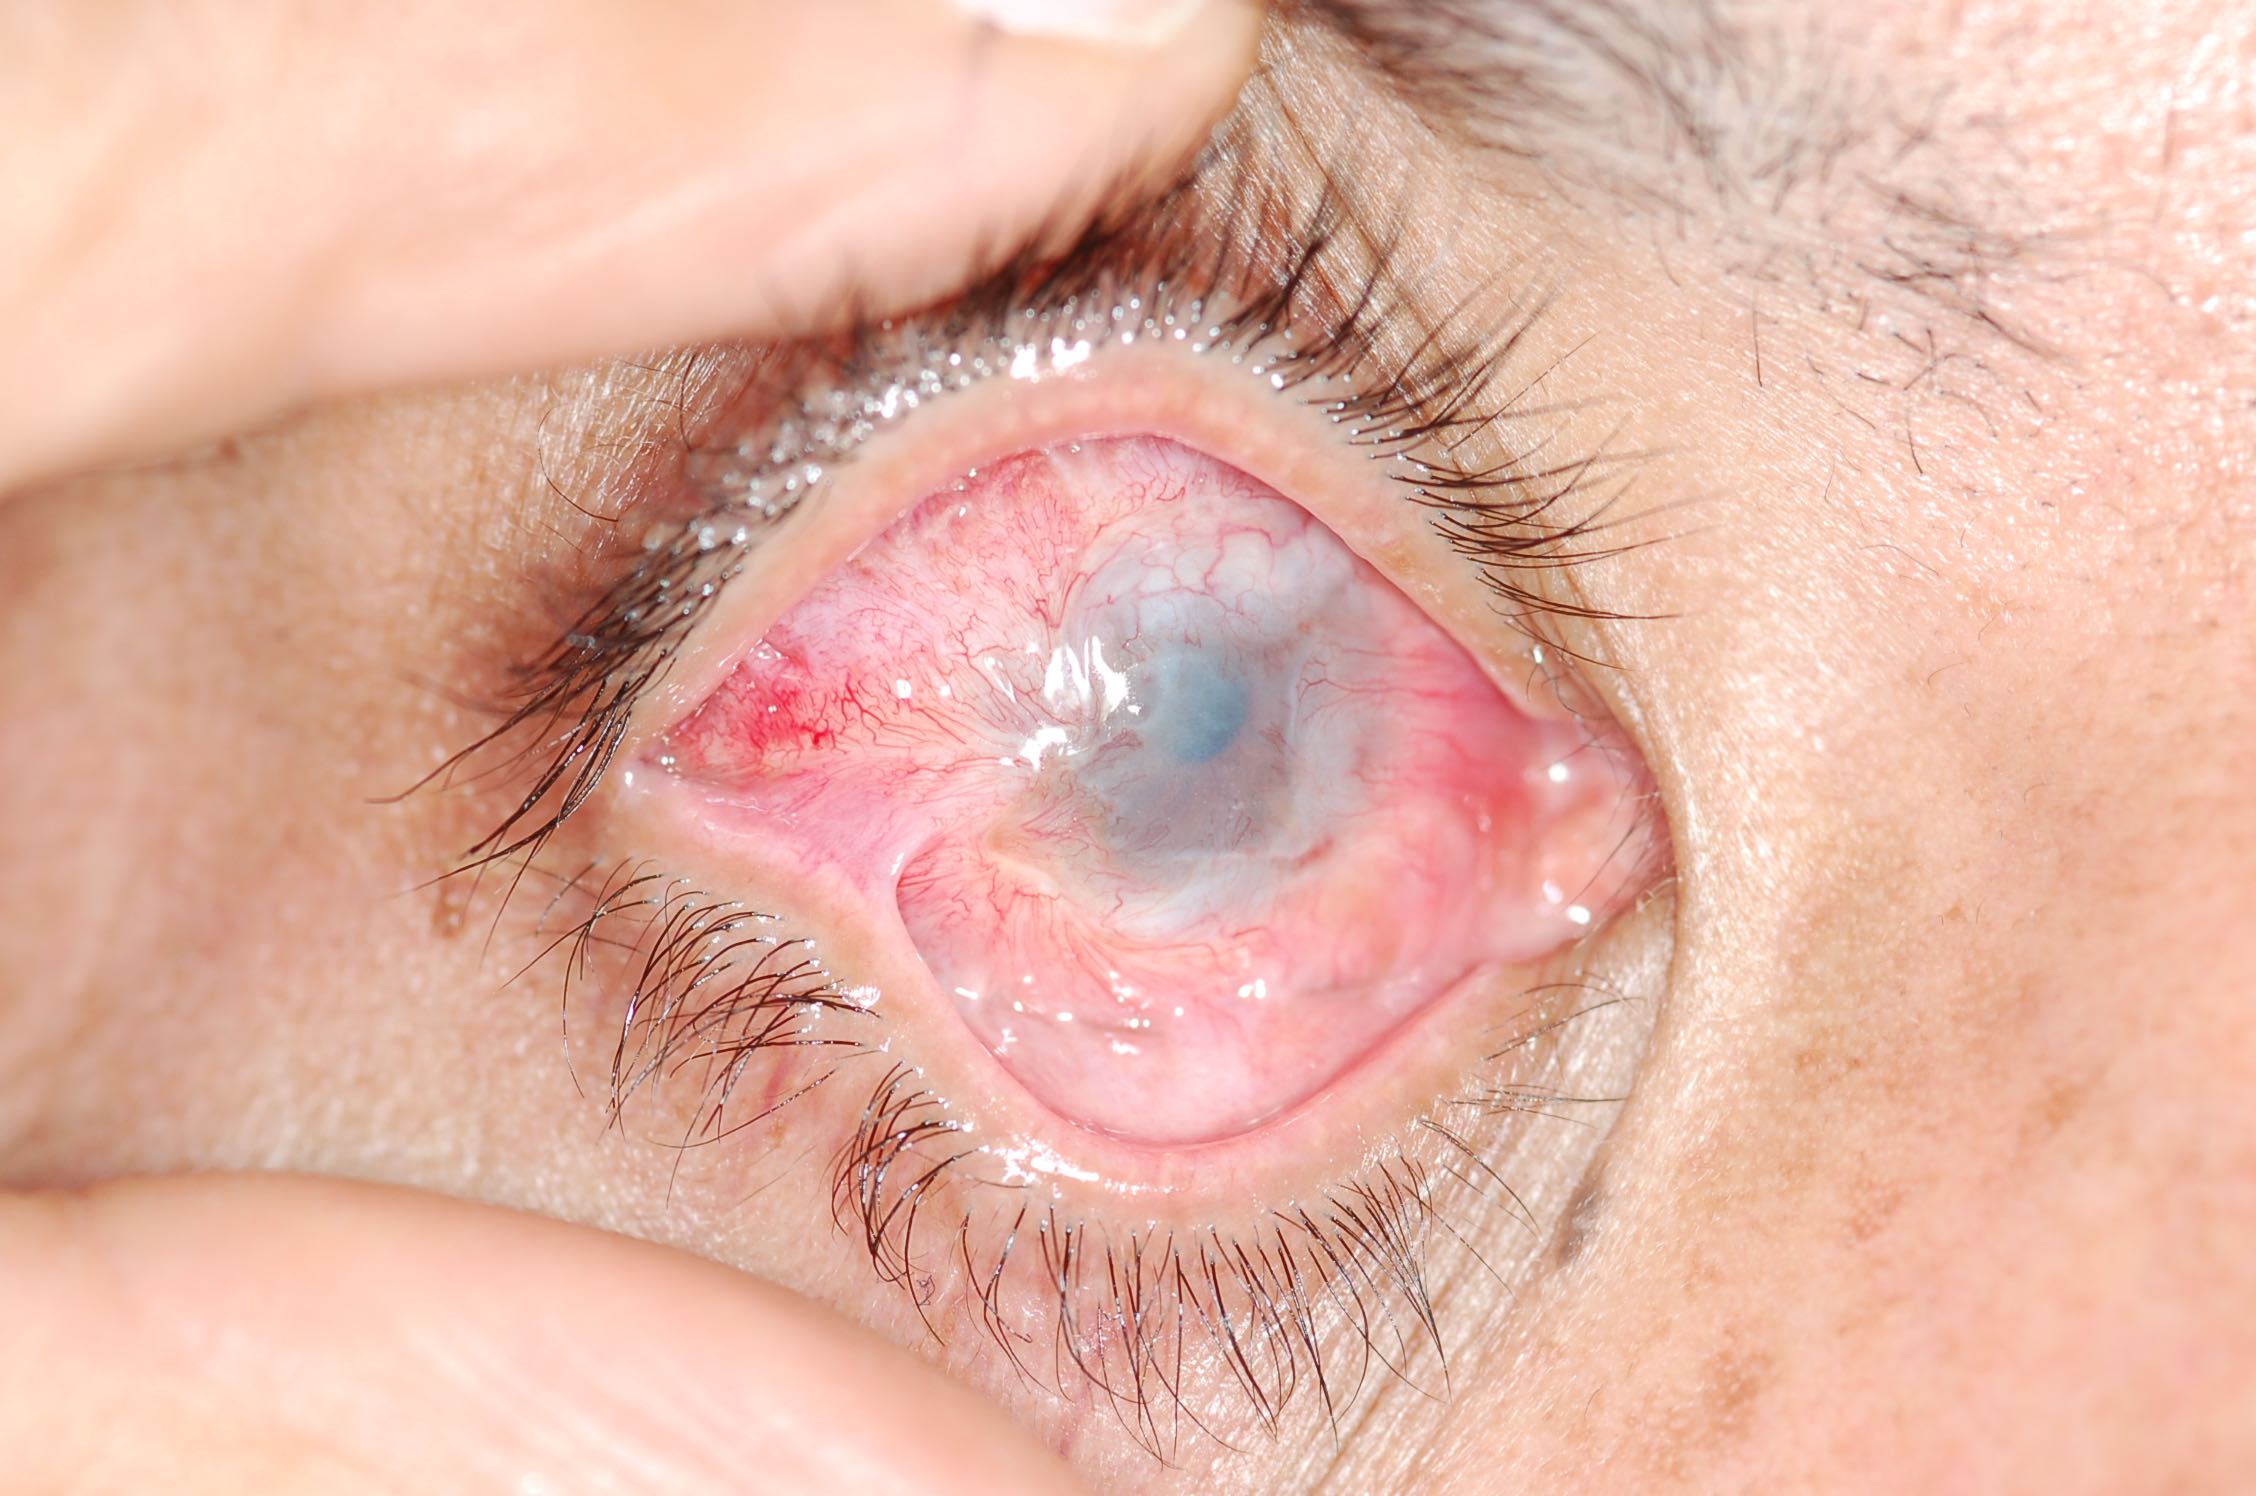 Severe alkali burn to the right eye. Being lipophilic, alkali solutions penetrate the eye more rapidly and have the potential to penetrate ocular tissues.  Acids, on the other hand, cause precipitation of proteins which creates a barrier and prevents further damage in most cases. There is destruction of the limbal stem cells causing limbal stem cell deficiency and opacification and neovasculatization of the cornea. There is symblepharon formation where by there are adhesions between the tarsal and bulbar conjunctiva with loss of the normal fornix. Other complications that can arise are increased intraocular pressure from inflammatory changes and direct damage to the trabecular meshwork. Loss of goblet cells and scarring of the lacrimal ductules exacerbates dryness. 